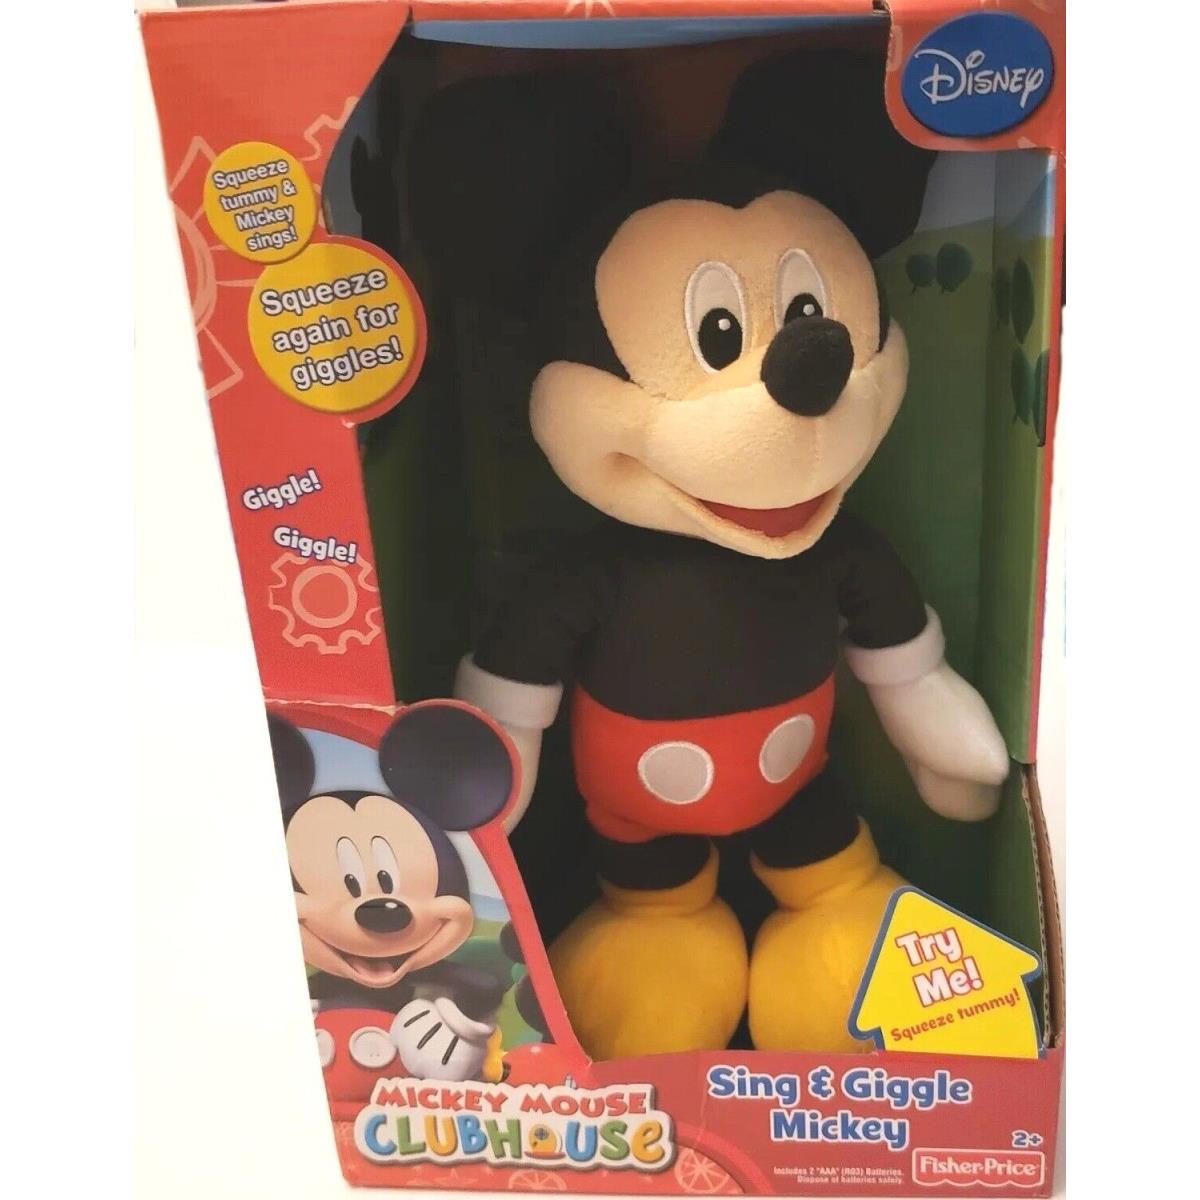 Fisher-price 98128 Sing Giggle Mickey Mouse Plush Doll Disney Retired I